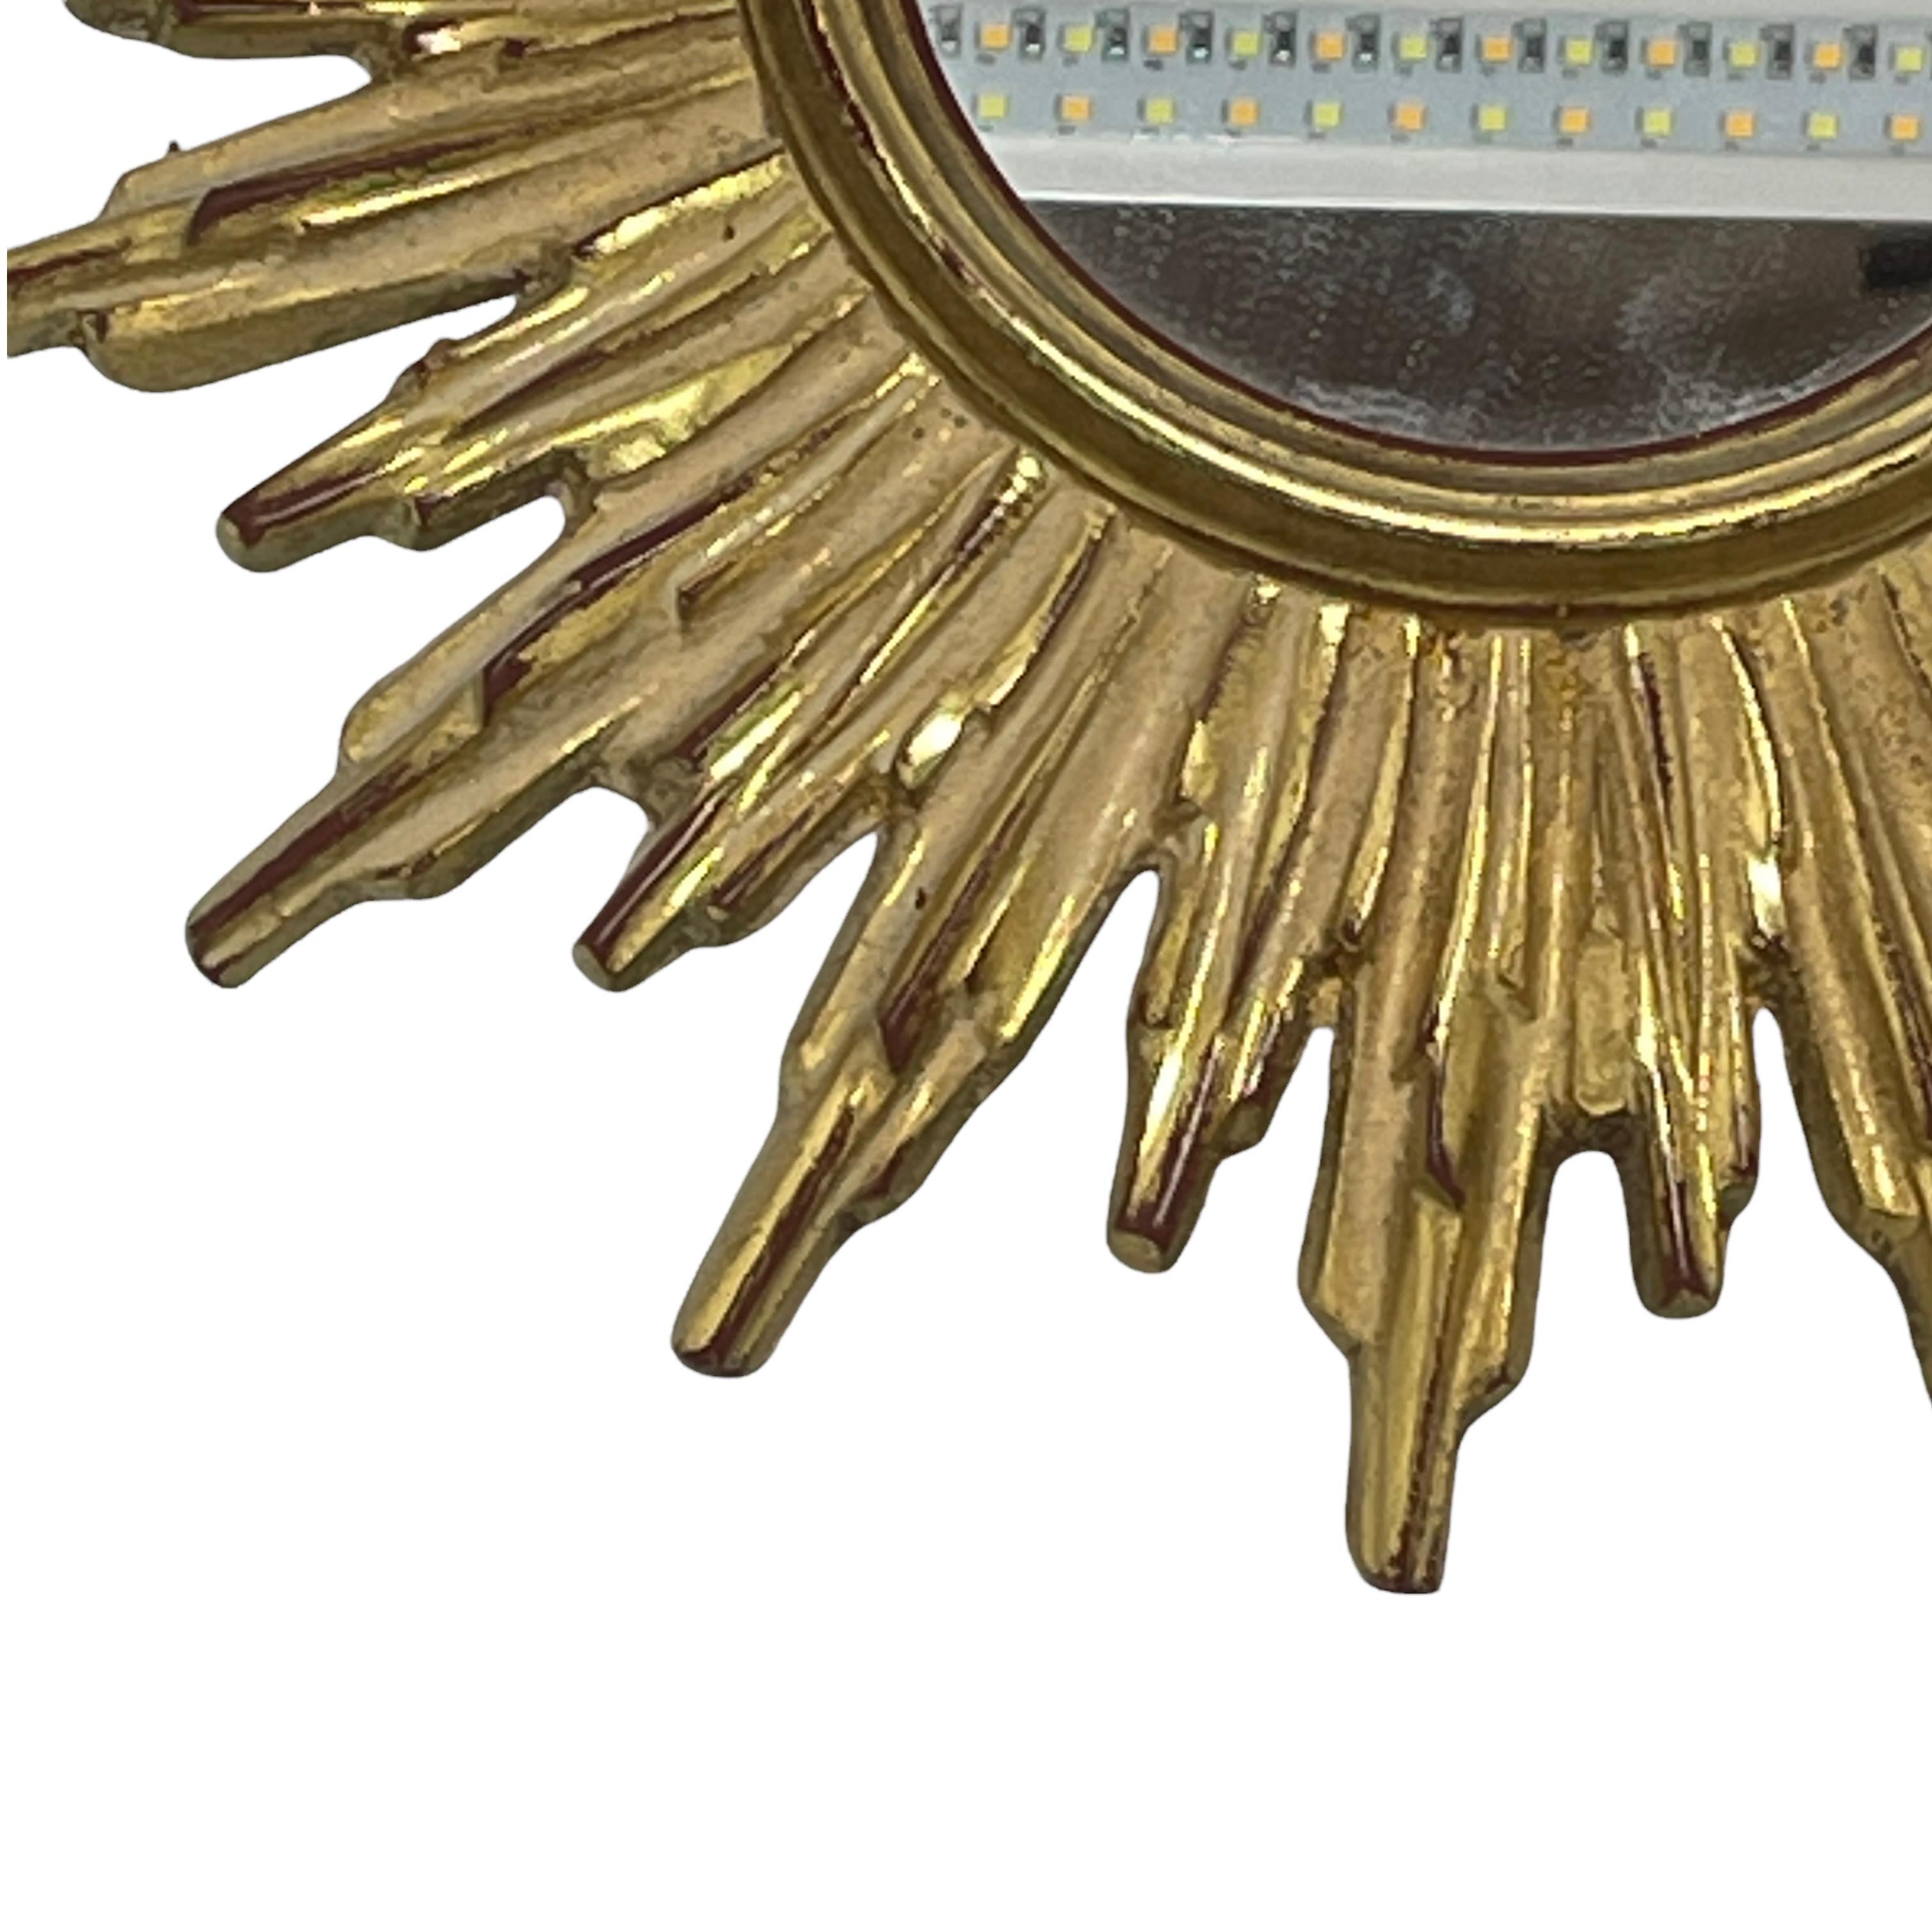 A gorgeous petite starburst mirror. Made of gilded Resin. No chips, no cracks, no repairs. It measures approximate: 10